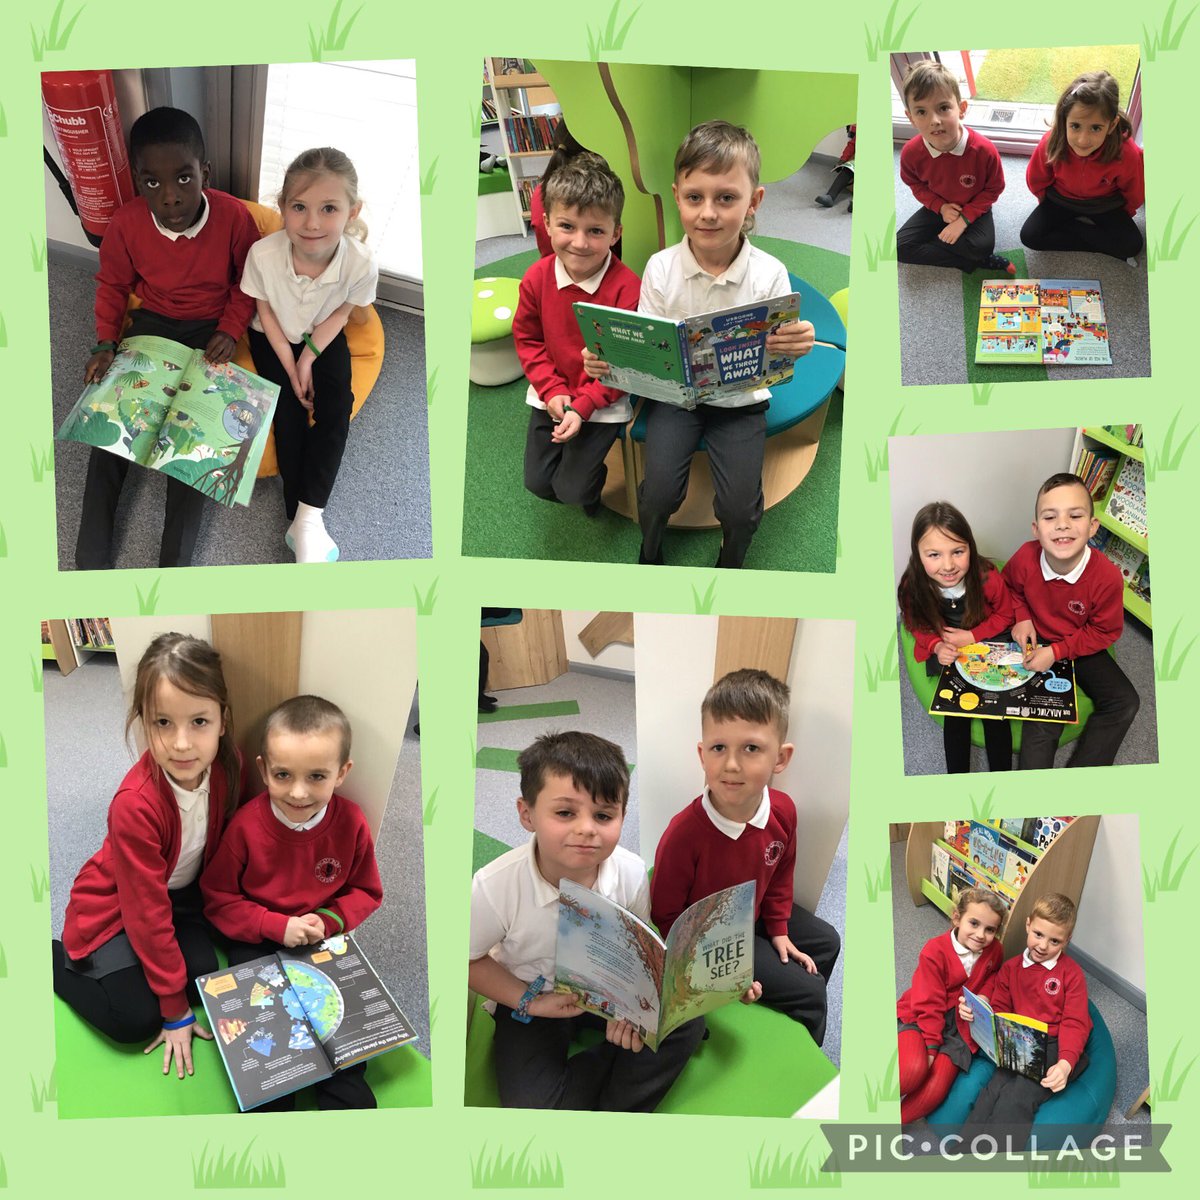 This morning in our library session, we started our Earth Day celebrations by finding and sharing books linked to the planet!🌍📖🤩#REACH #WygateWay #EarthDay #GreenPledge @VoyageEP